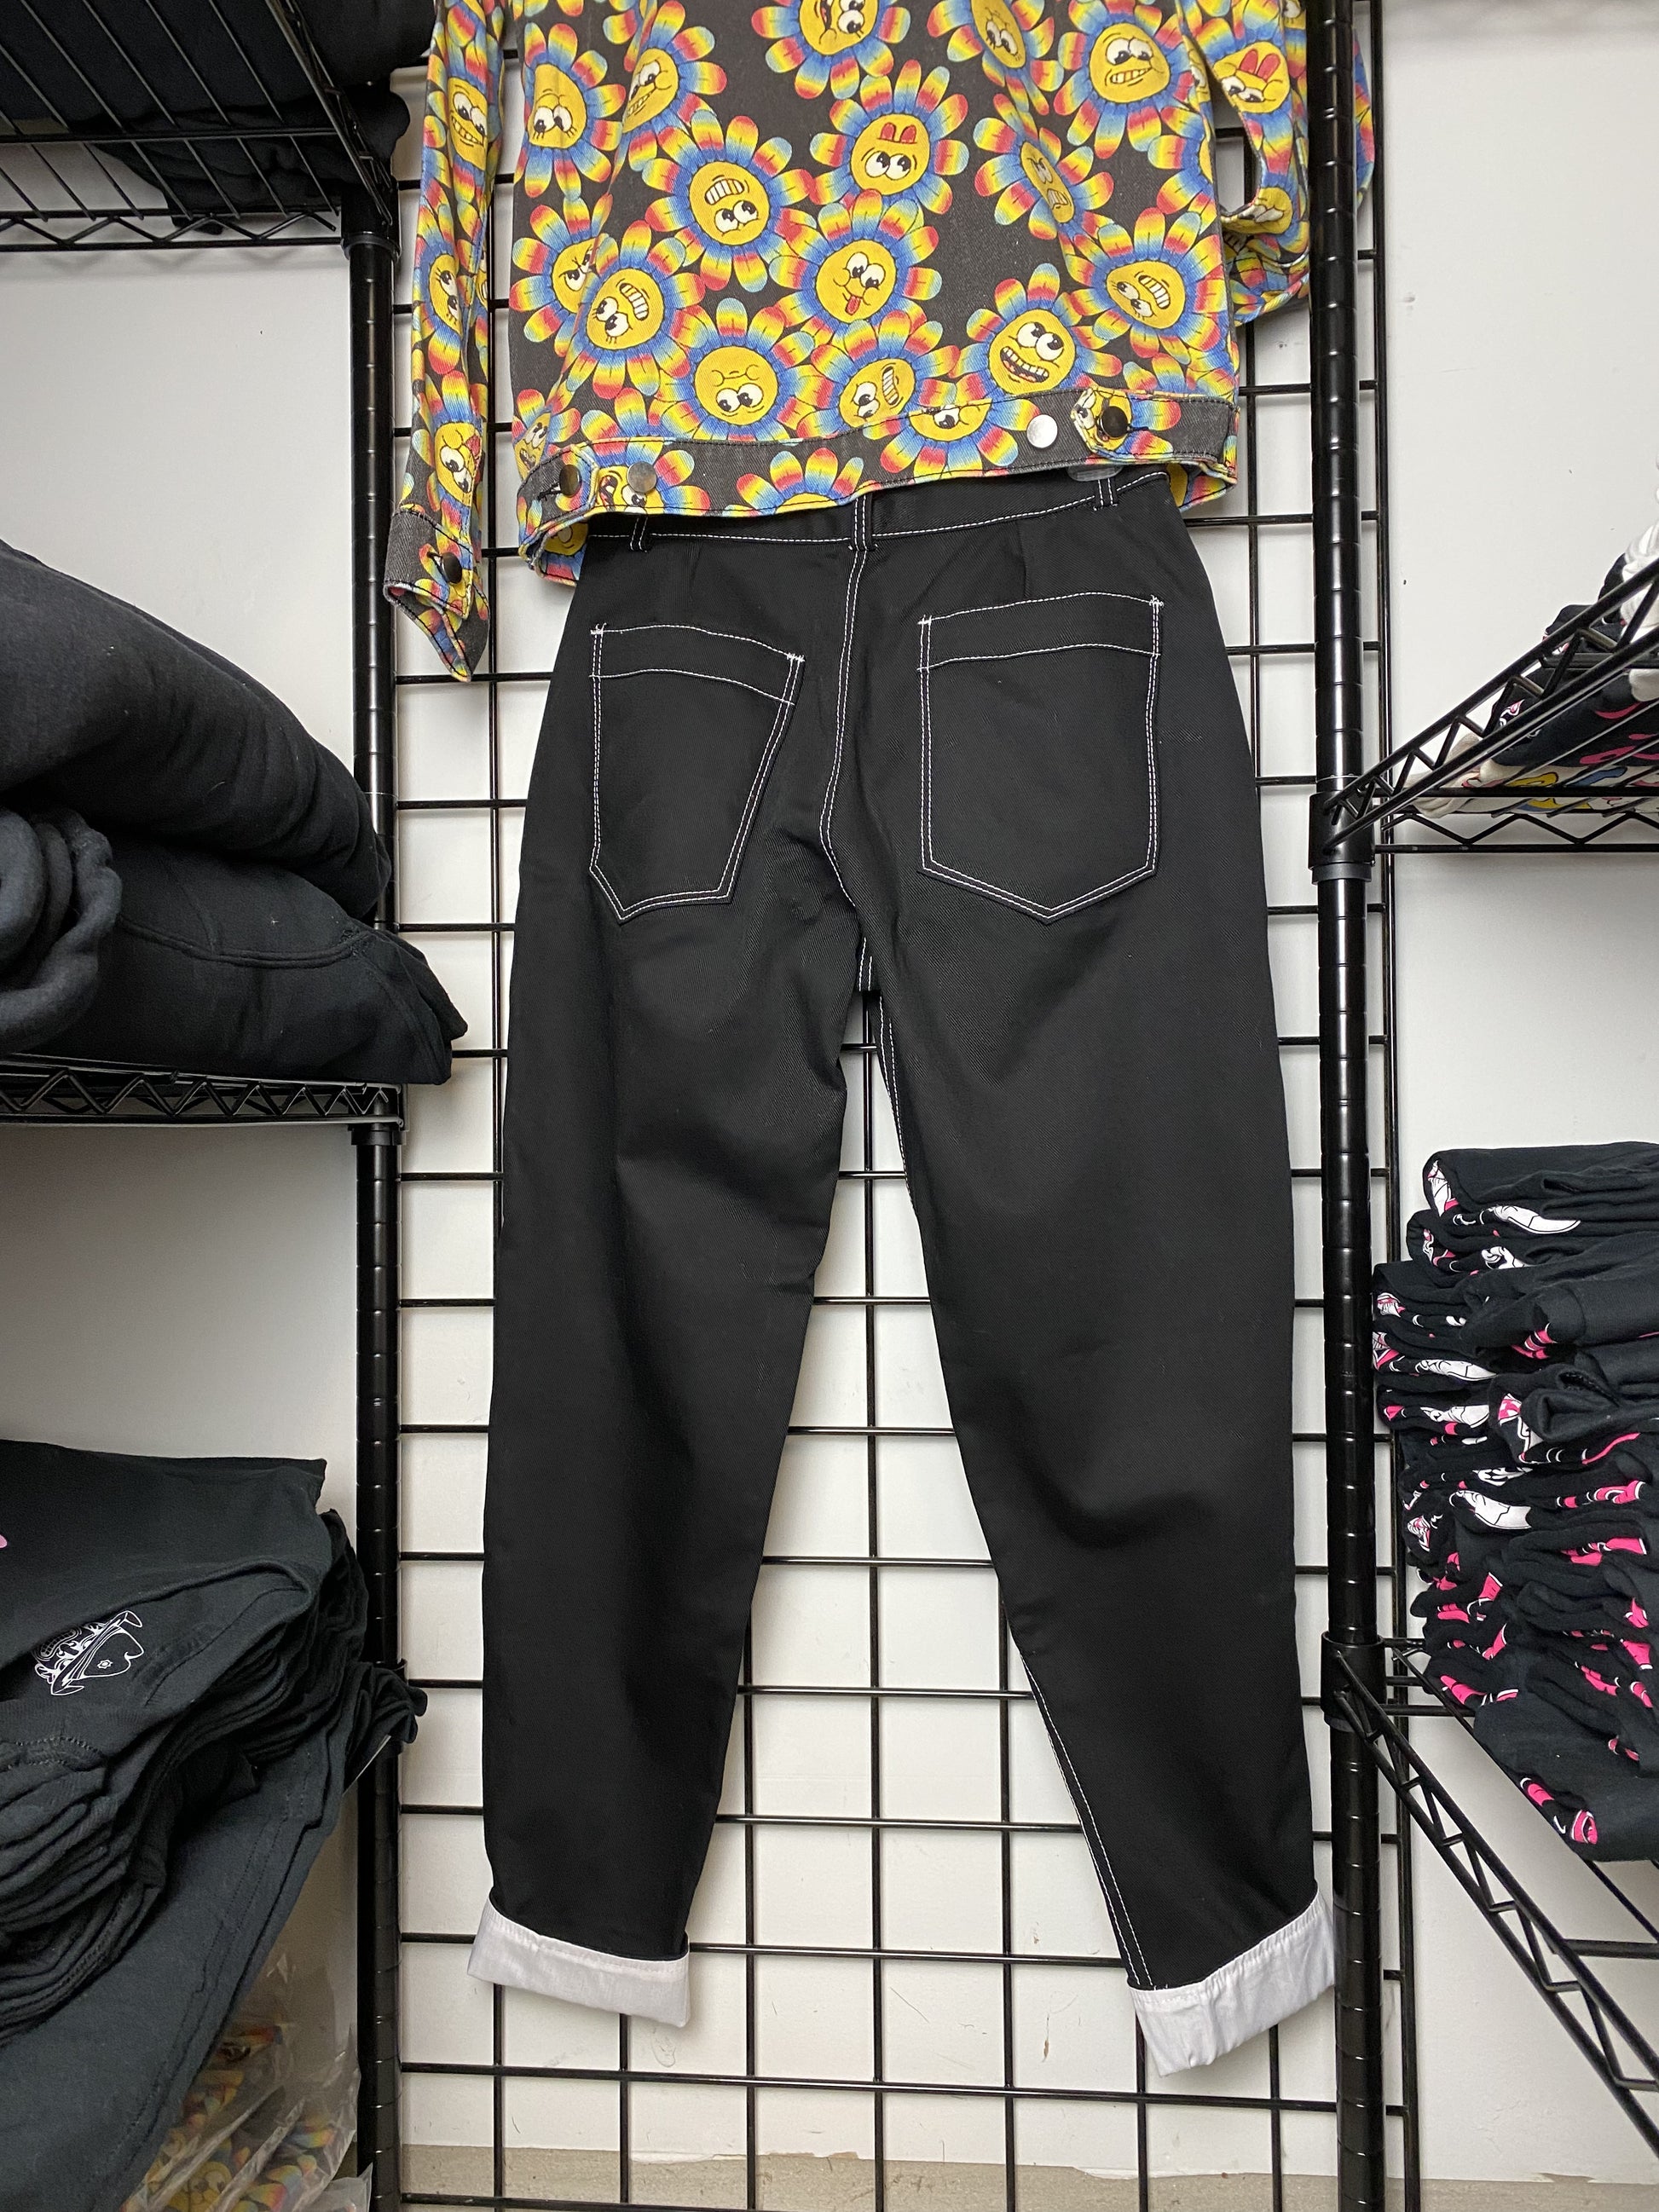 A picture of a black pair of pants (back view) hung on a black wire mesh background.  The top stitching is white as well as the button.  The cuffs are rolled up to show the white fabric underneath.